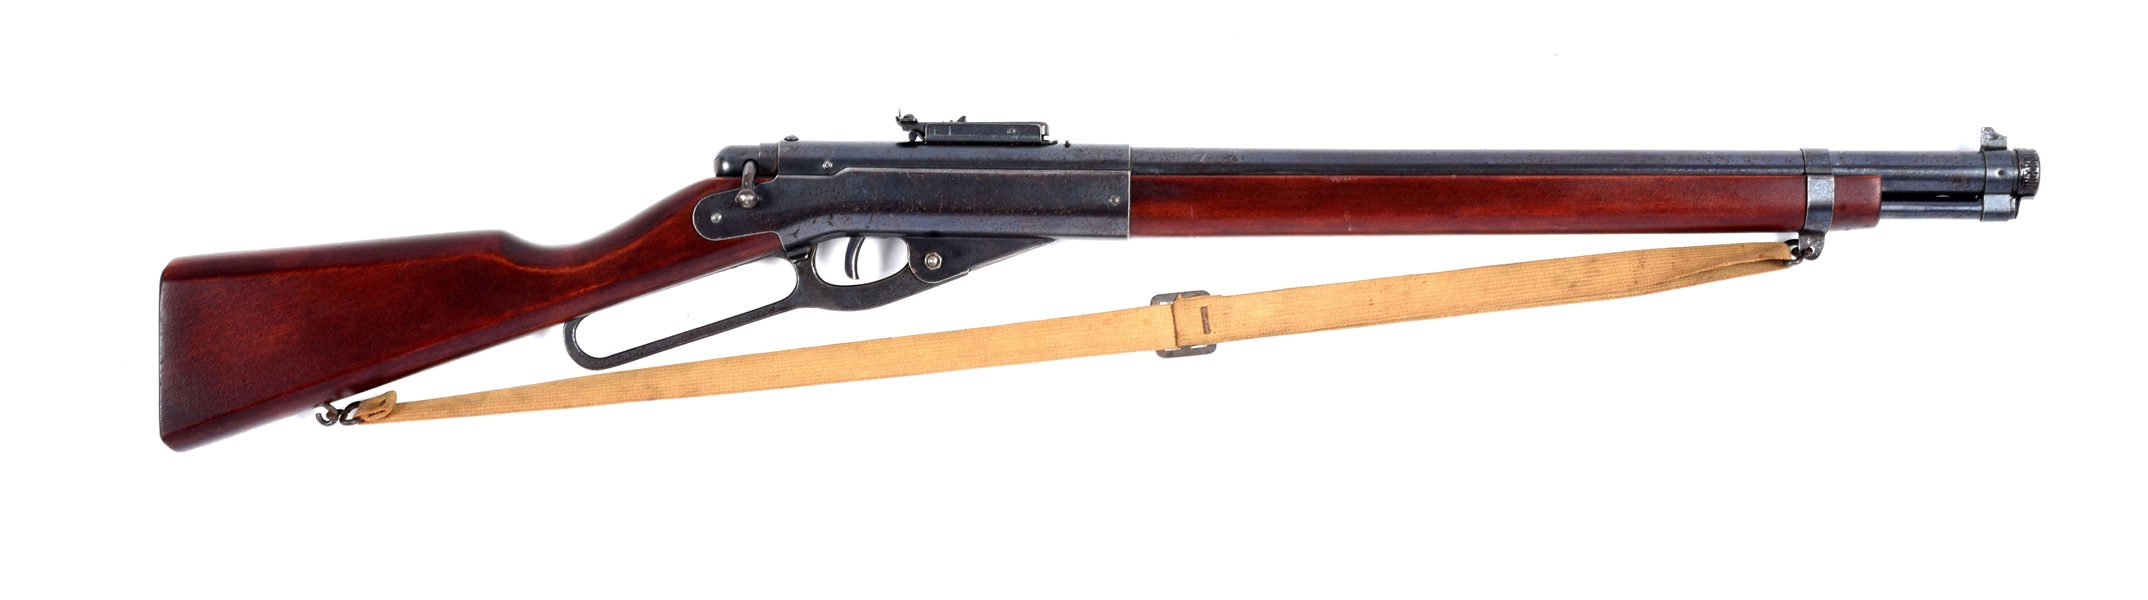 DAISY NO. 140 DEFENDER REPEATER AIR RIFLE.